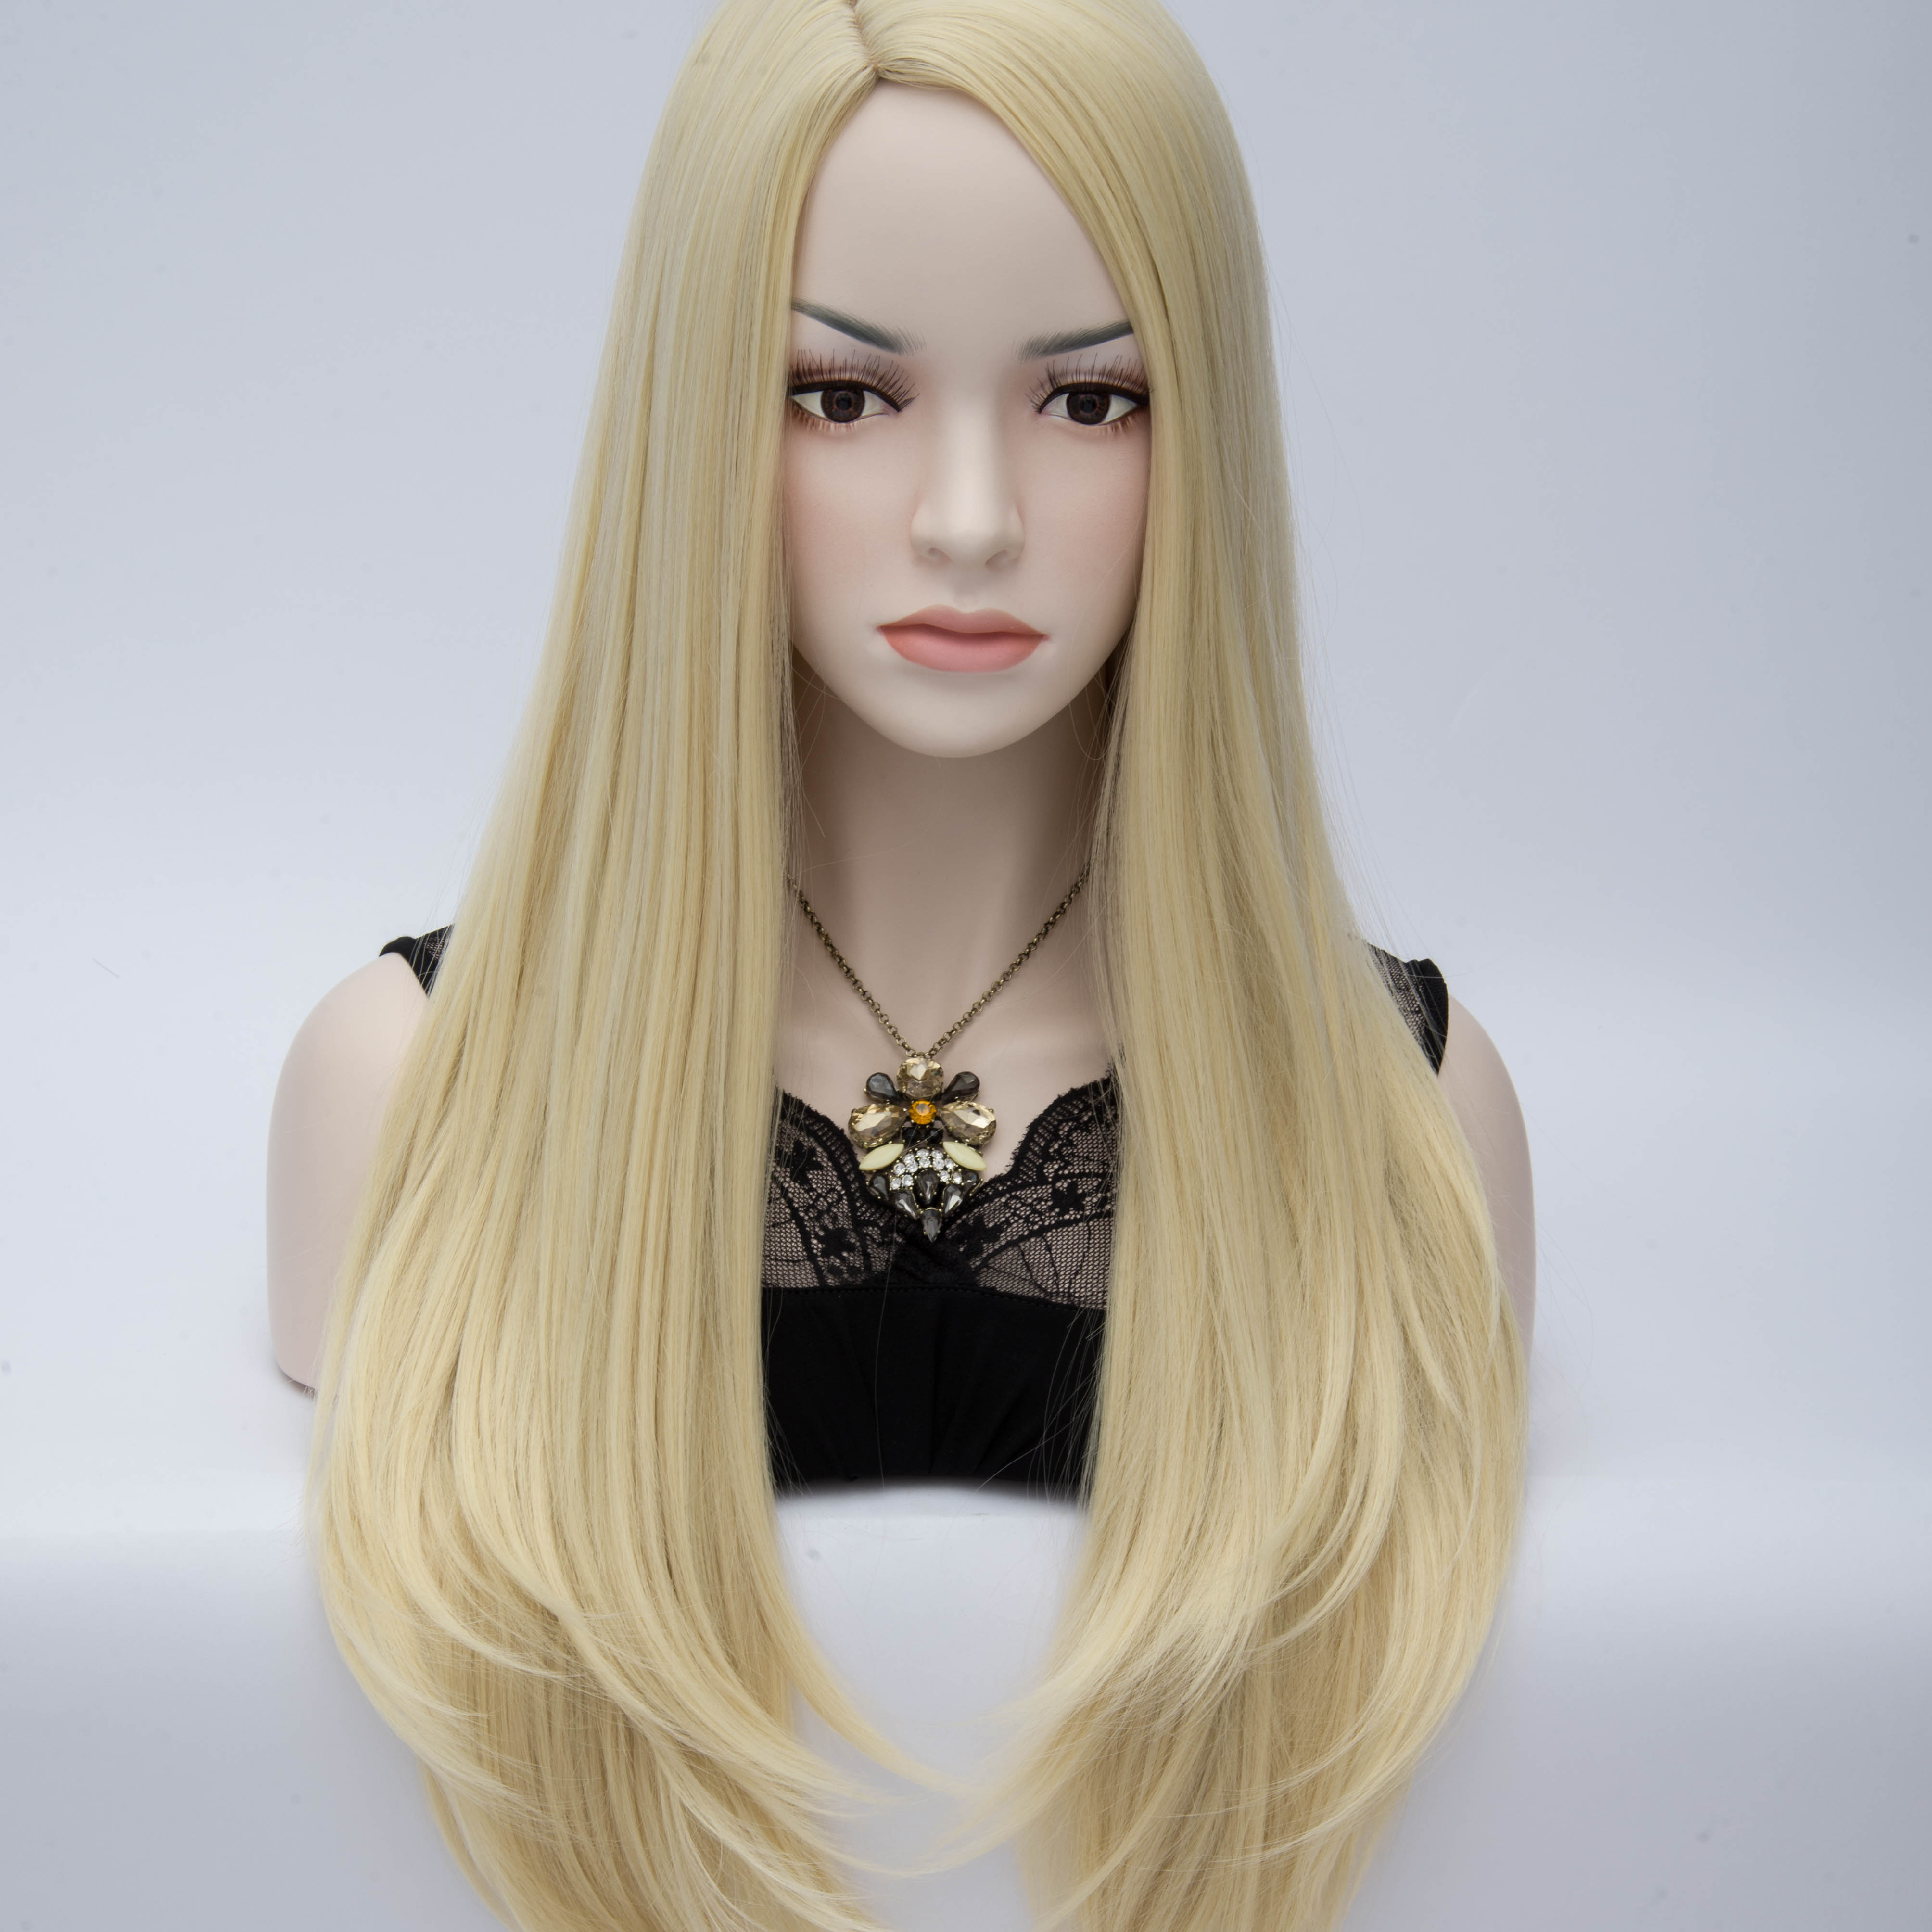 Light Blonde U-Style Long Straight Anime Hair Cosplay Party Wig 28 Inches